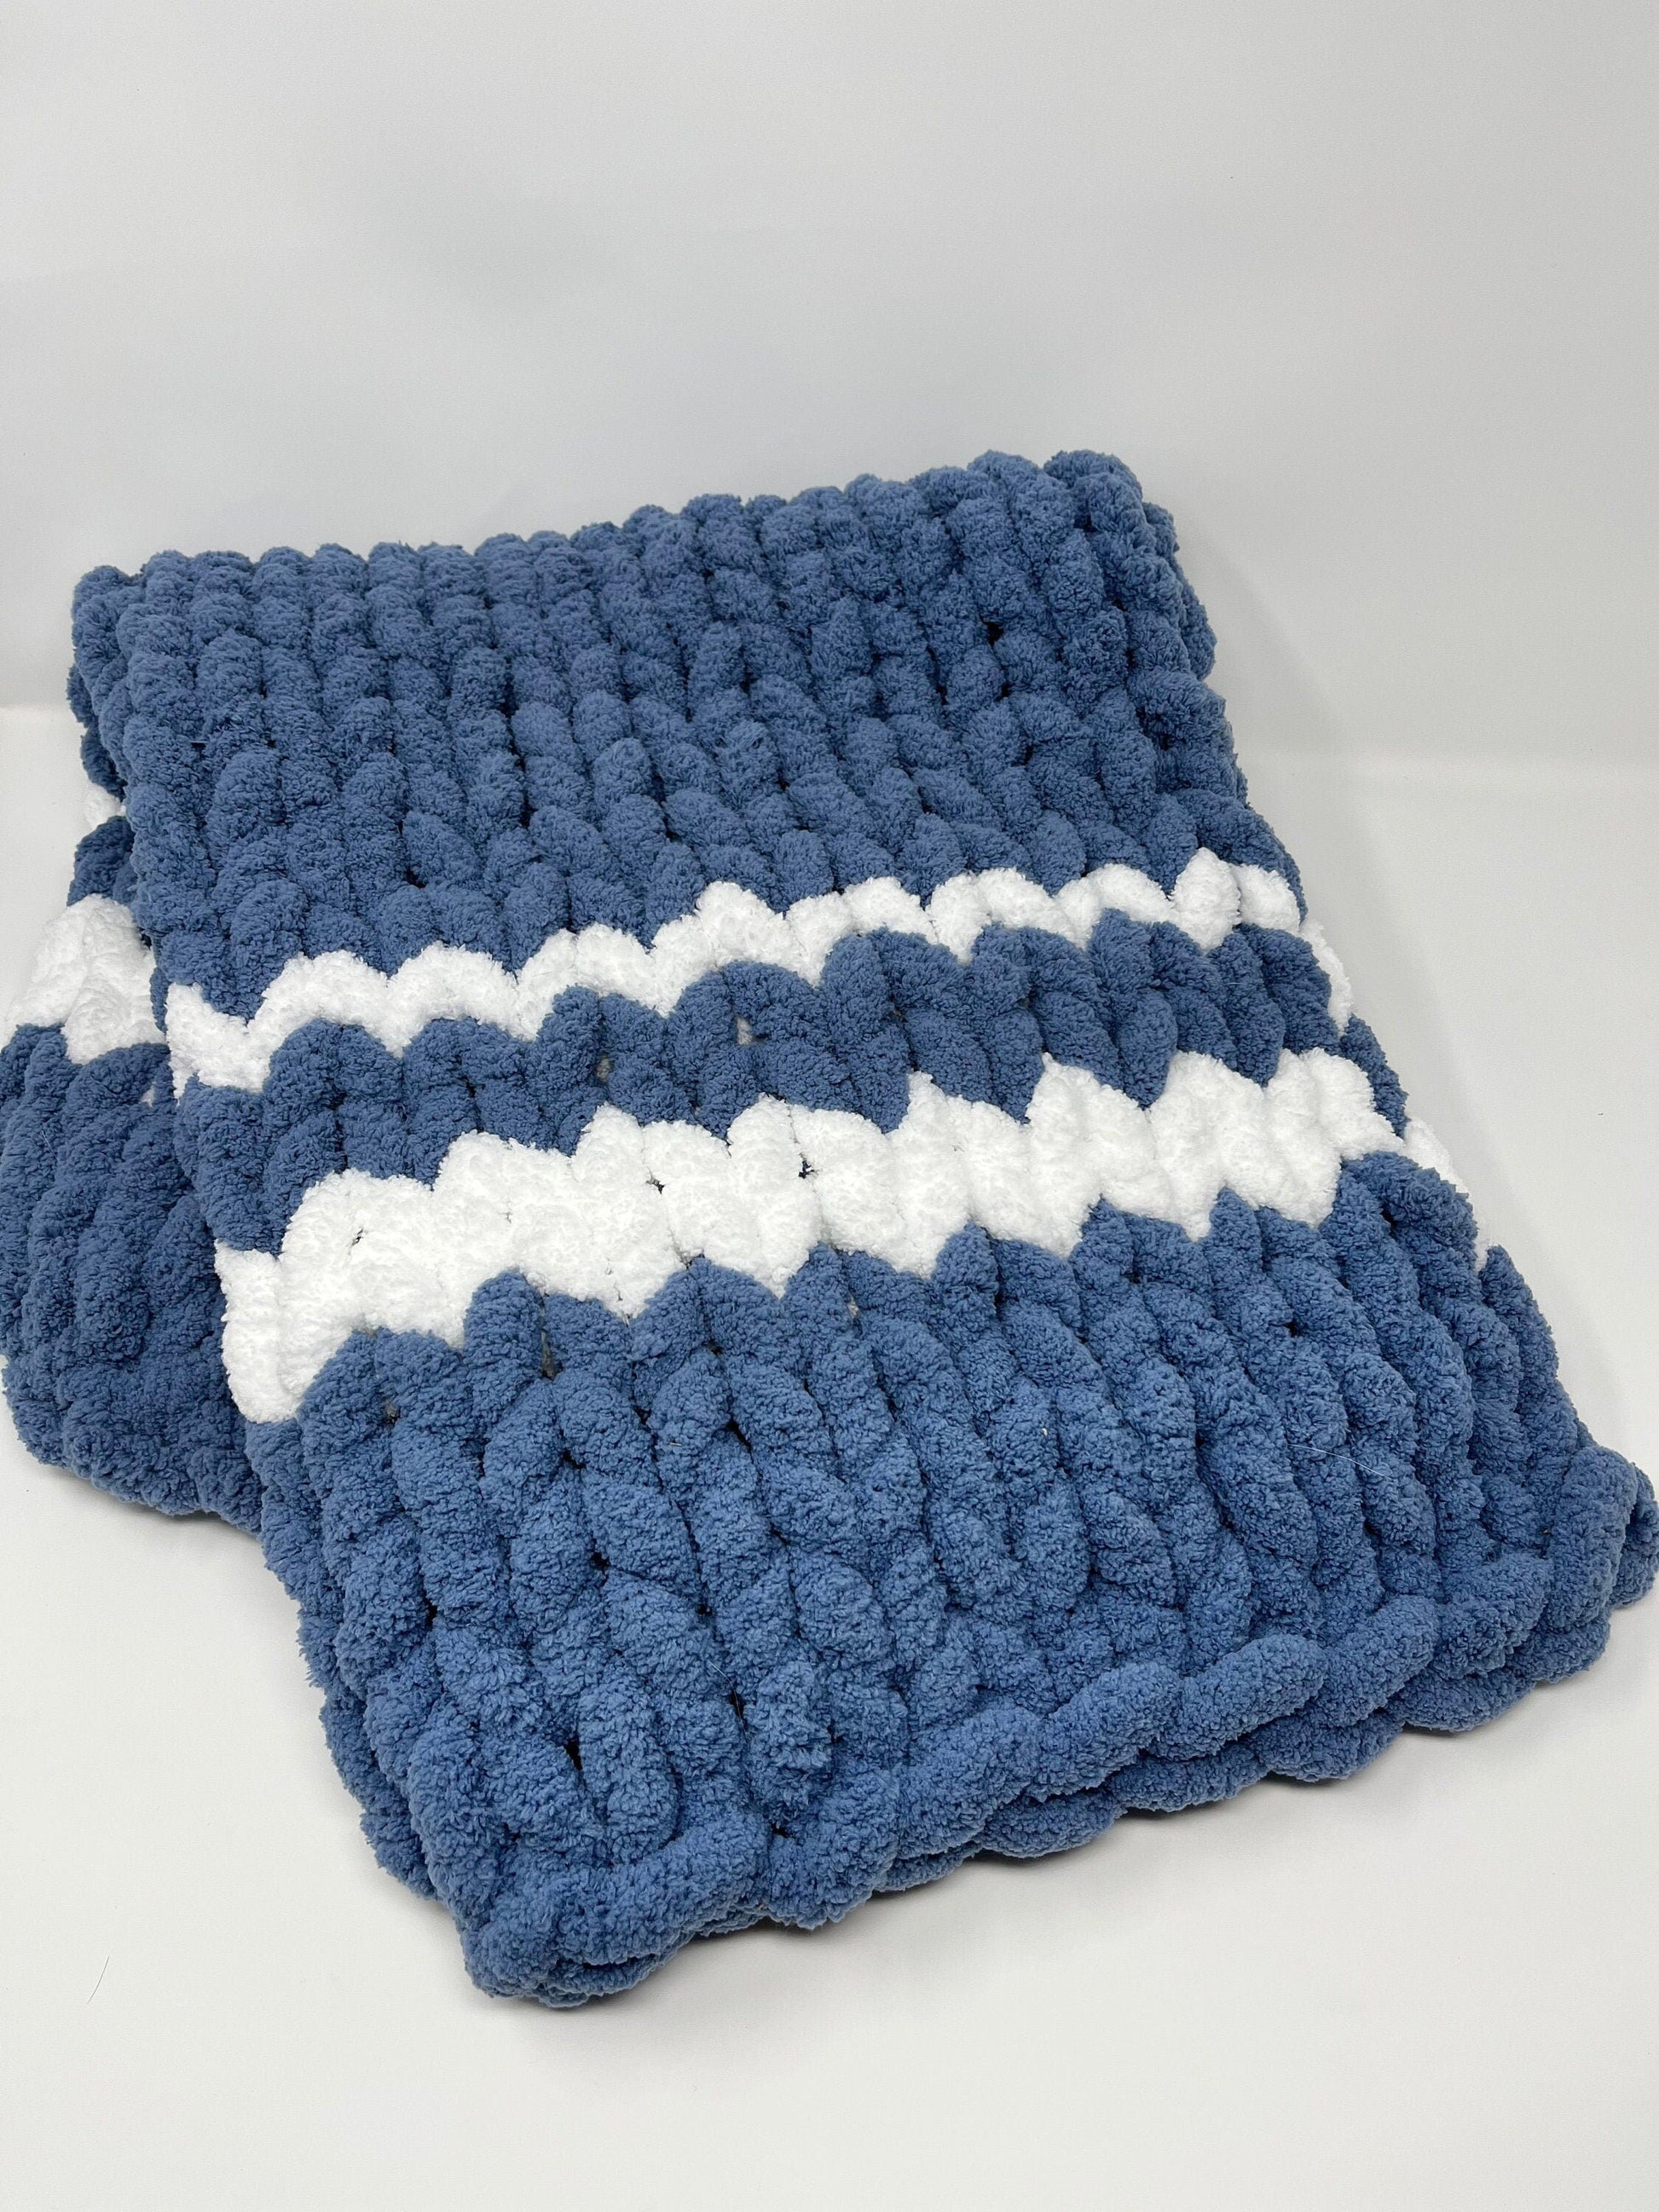 Chunky Knit Baby Blanket